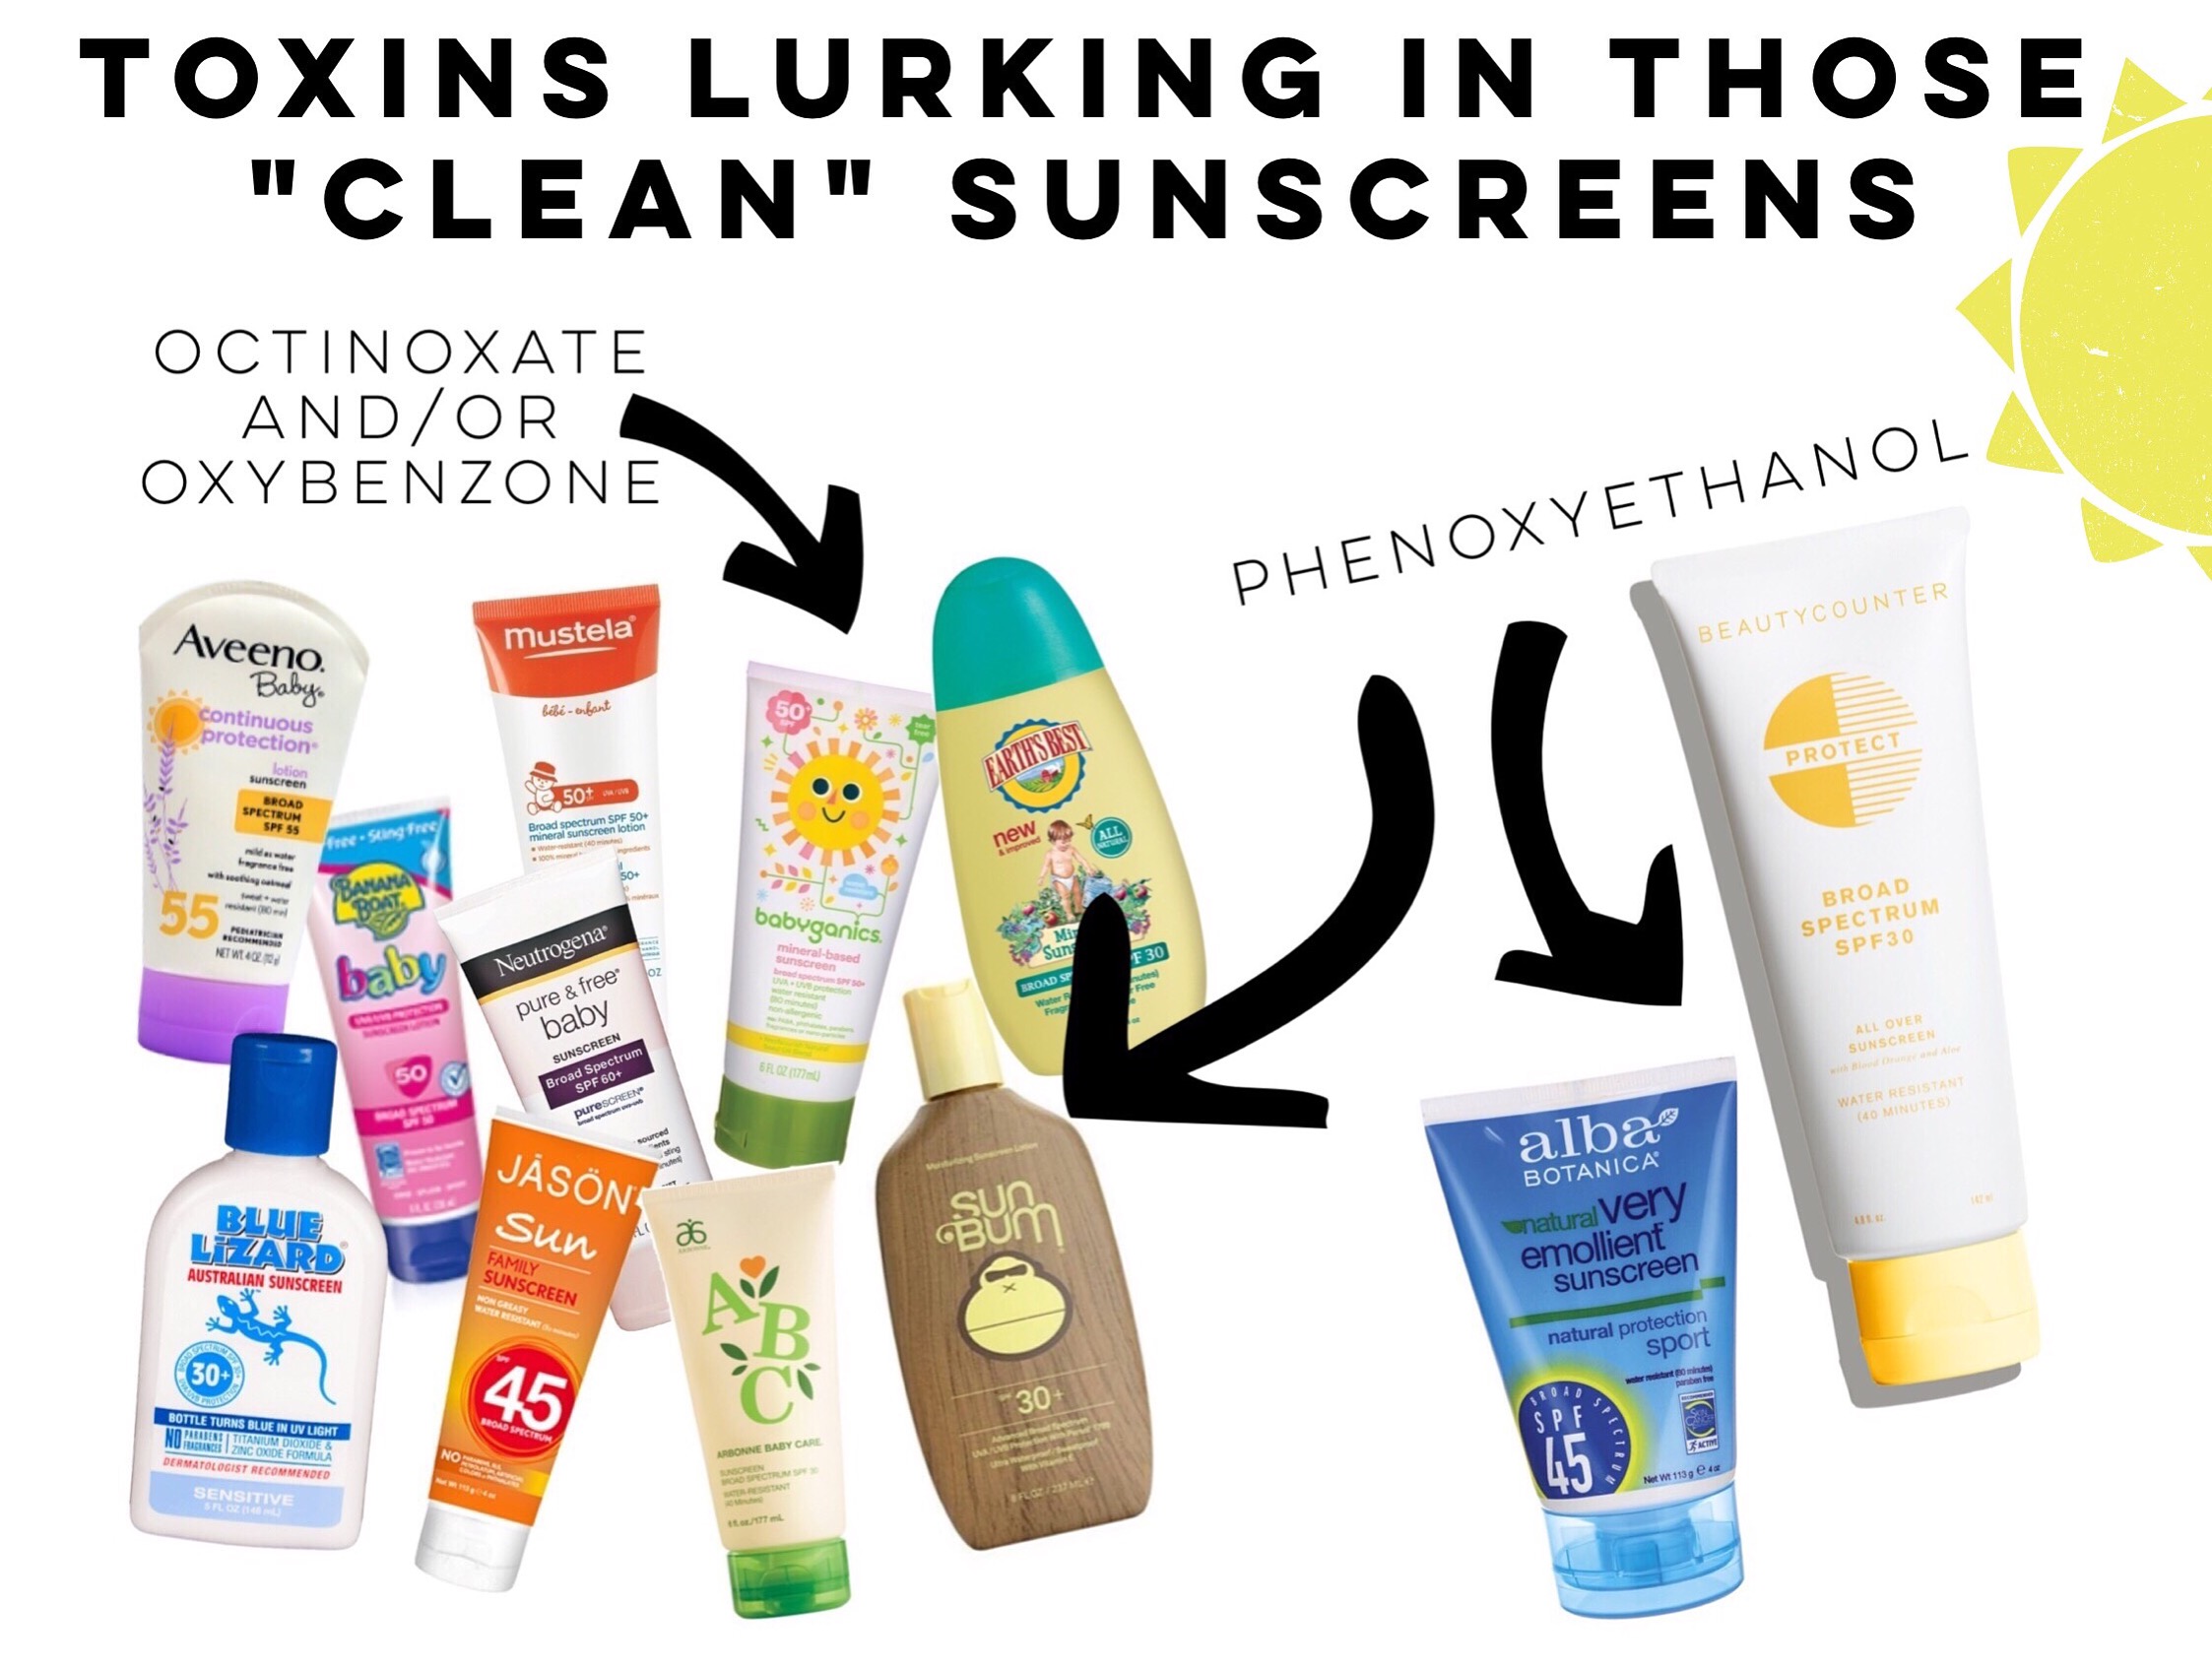 best non toxic sunscreen for babies